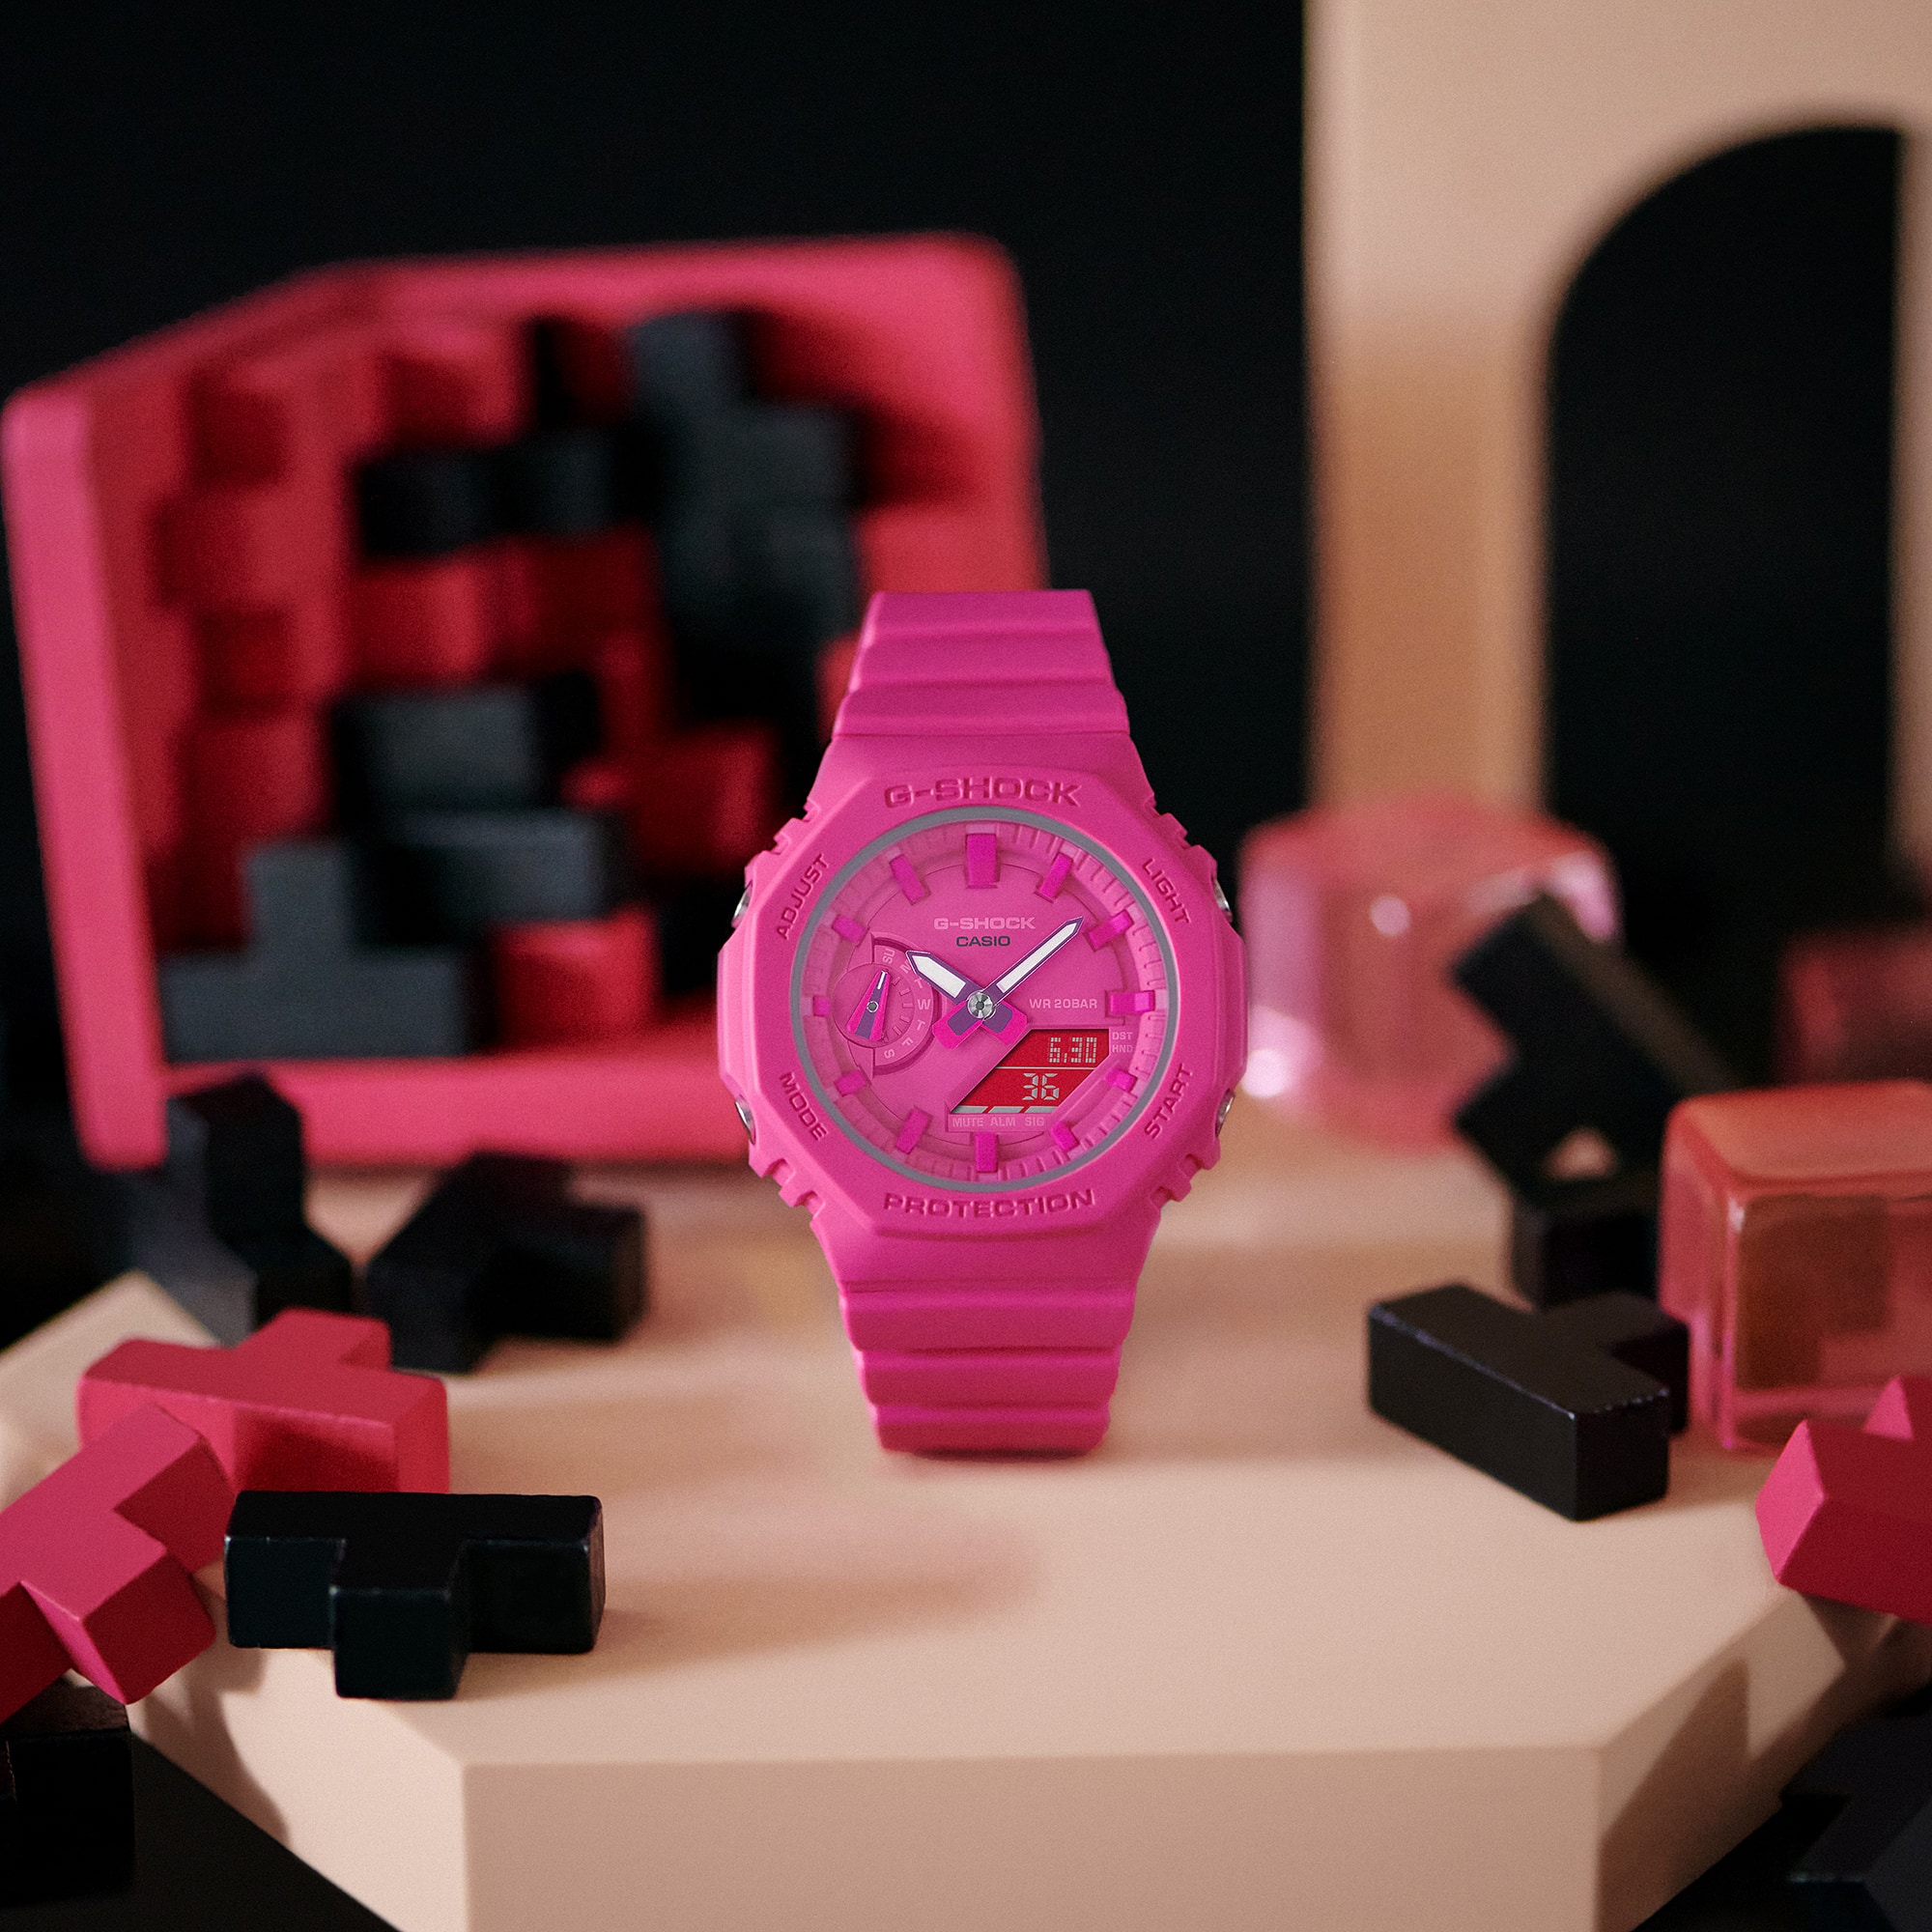 GMAS2100P-4A G-SHOCK Pink Analog Digital watch with black and pink blocks